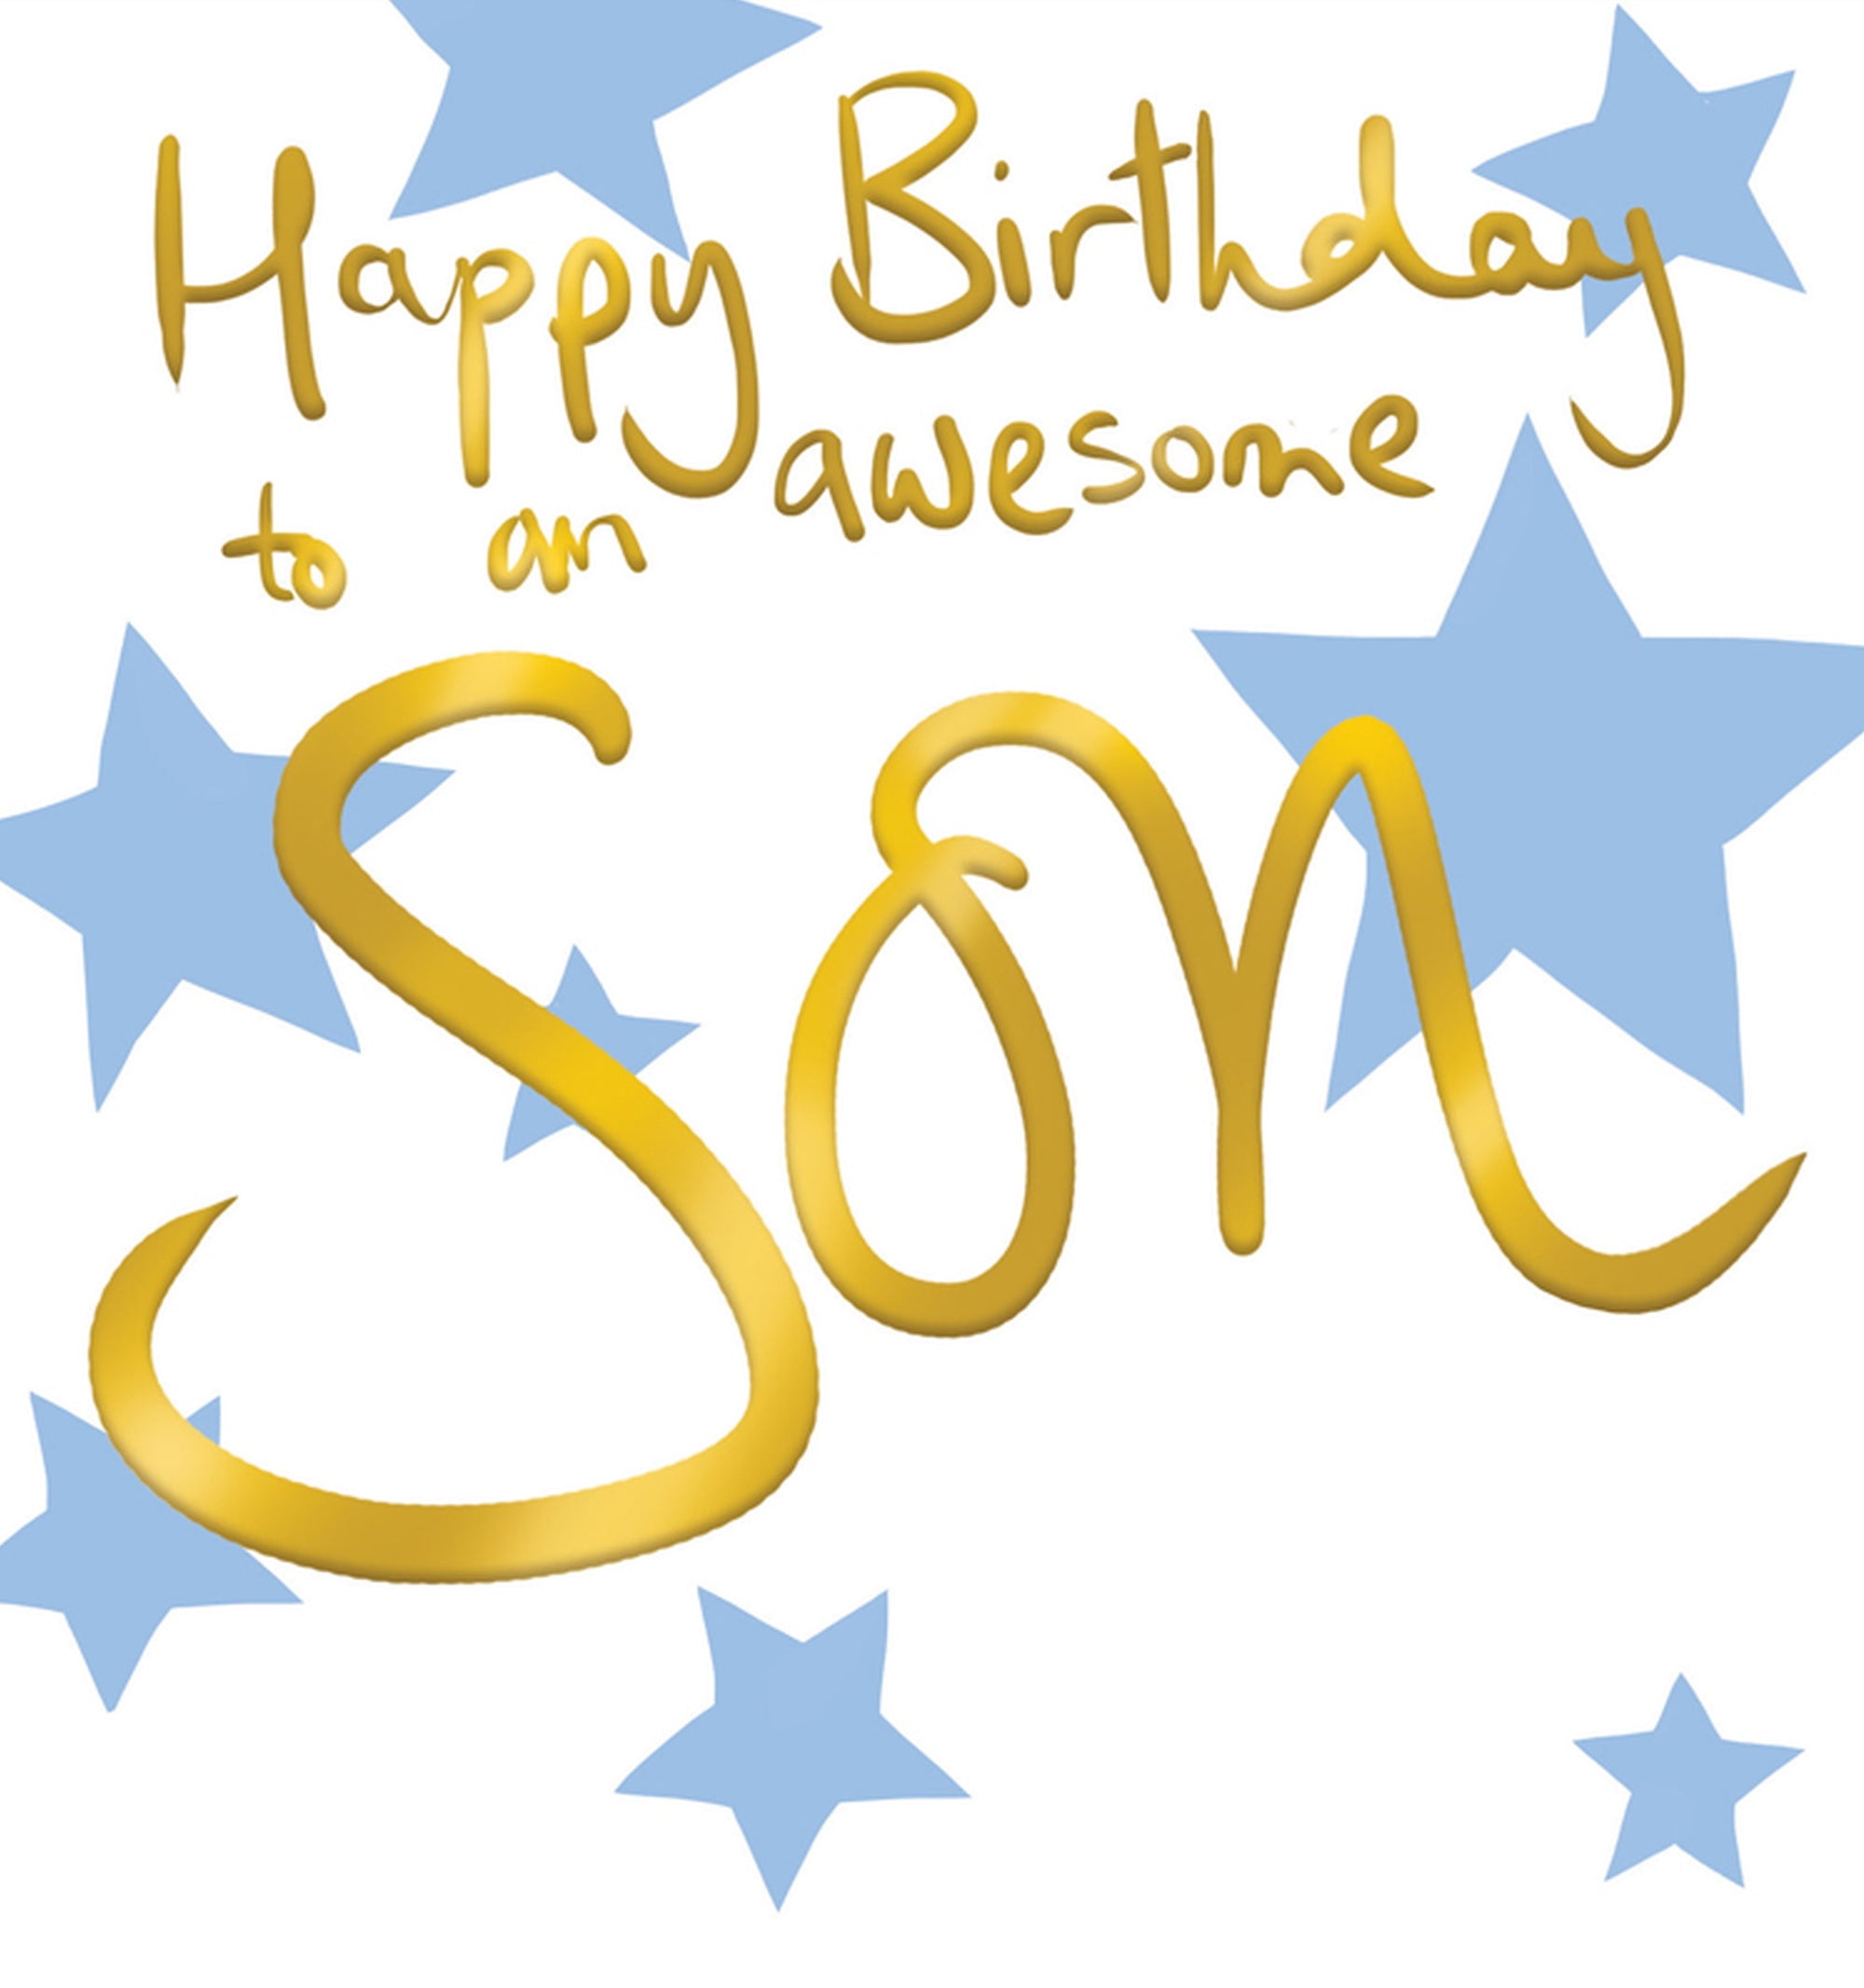 Awesome Son Blue Stars Birthday Card from Penny Black